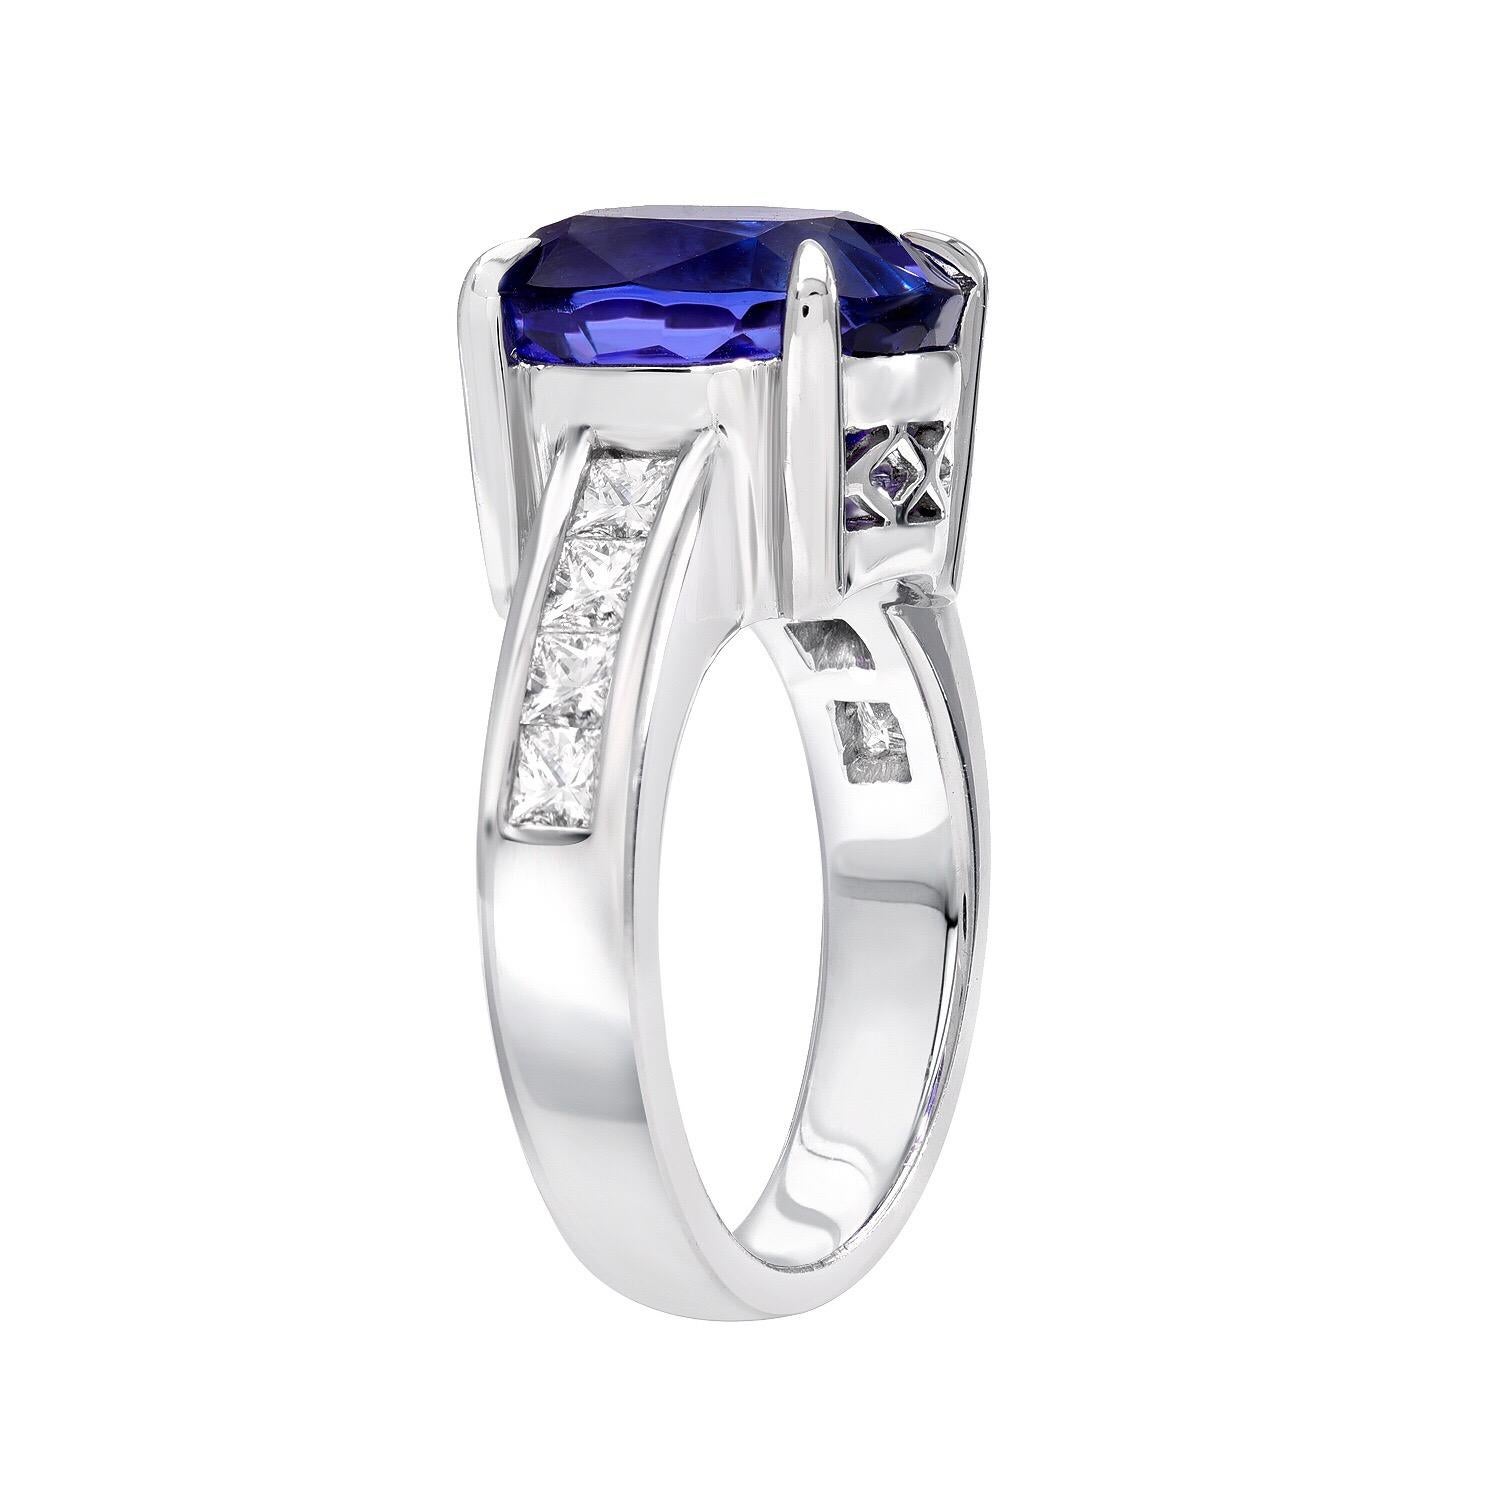 Spectacular 6.80 carat cushion cut Tanzanite, set in a 18K white gold ring for women, adorned by a total of 0.65 carat princess cut diamonds.
Ring size 5.5. Re-sizing is complementary upon request.
Returns are accepted and paid by us within 7 days